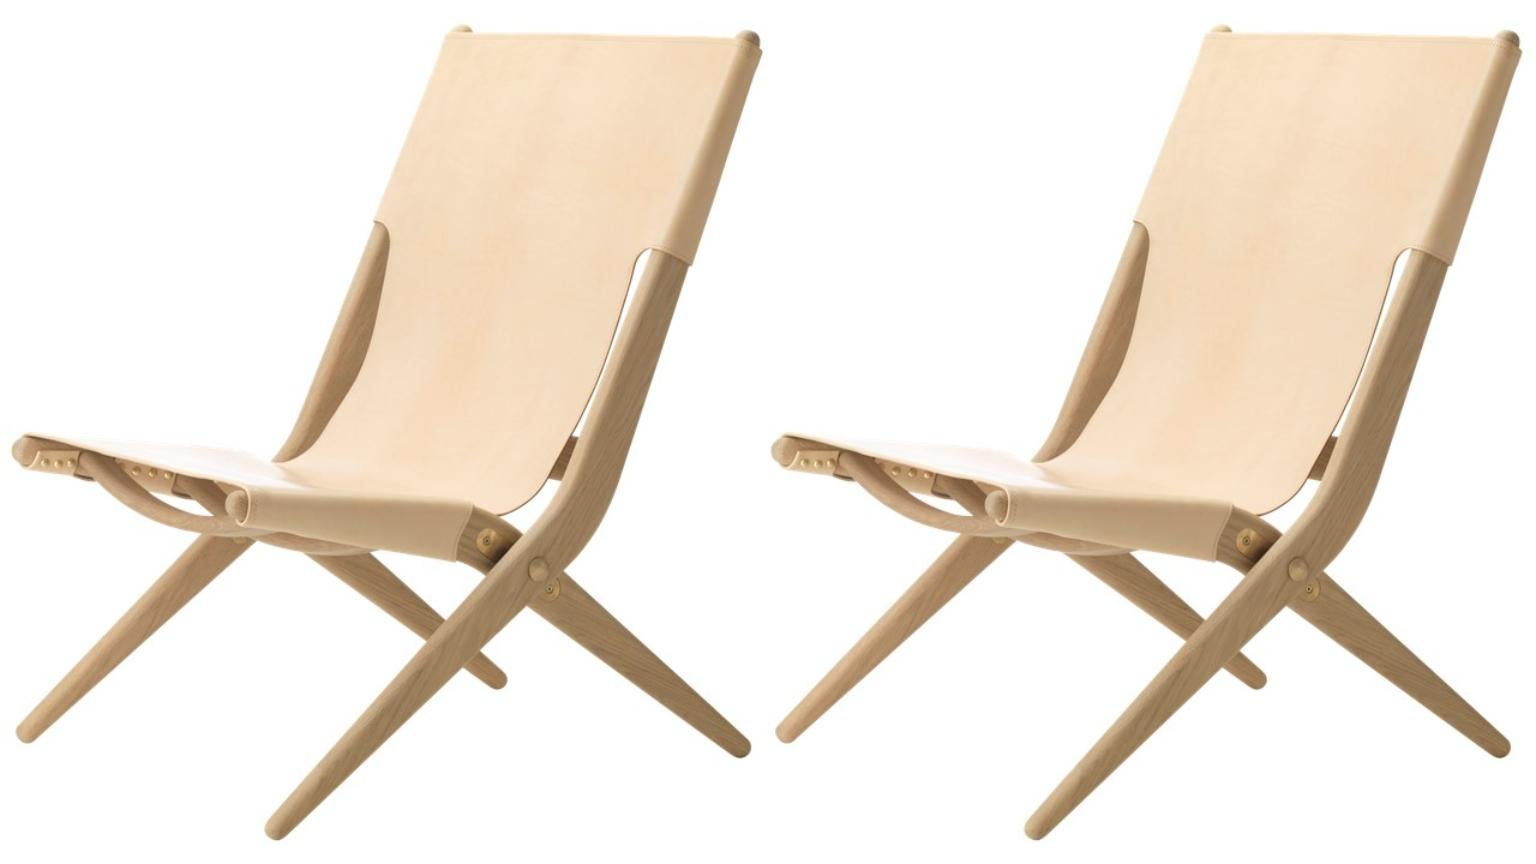 Set of 2 natural oak and natural leather saxe chairs by Lassen
Dimensions: W 60 x D 67 x H 84 cm 
Materials: leather, oak.

Mogens Lassen was perceived as ‘the naughty boy in class’, but he aimed for perfection in each design project. His eye